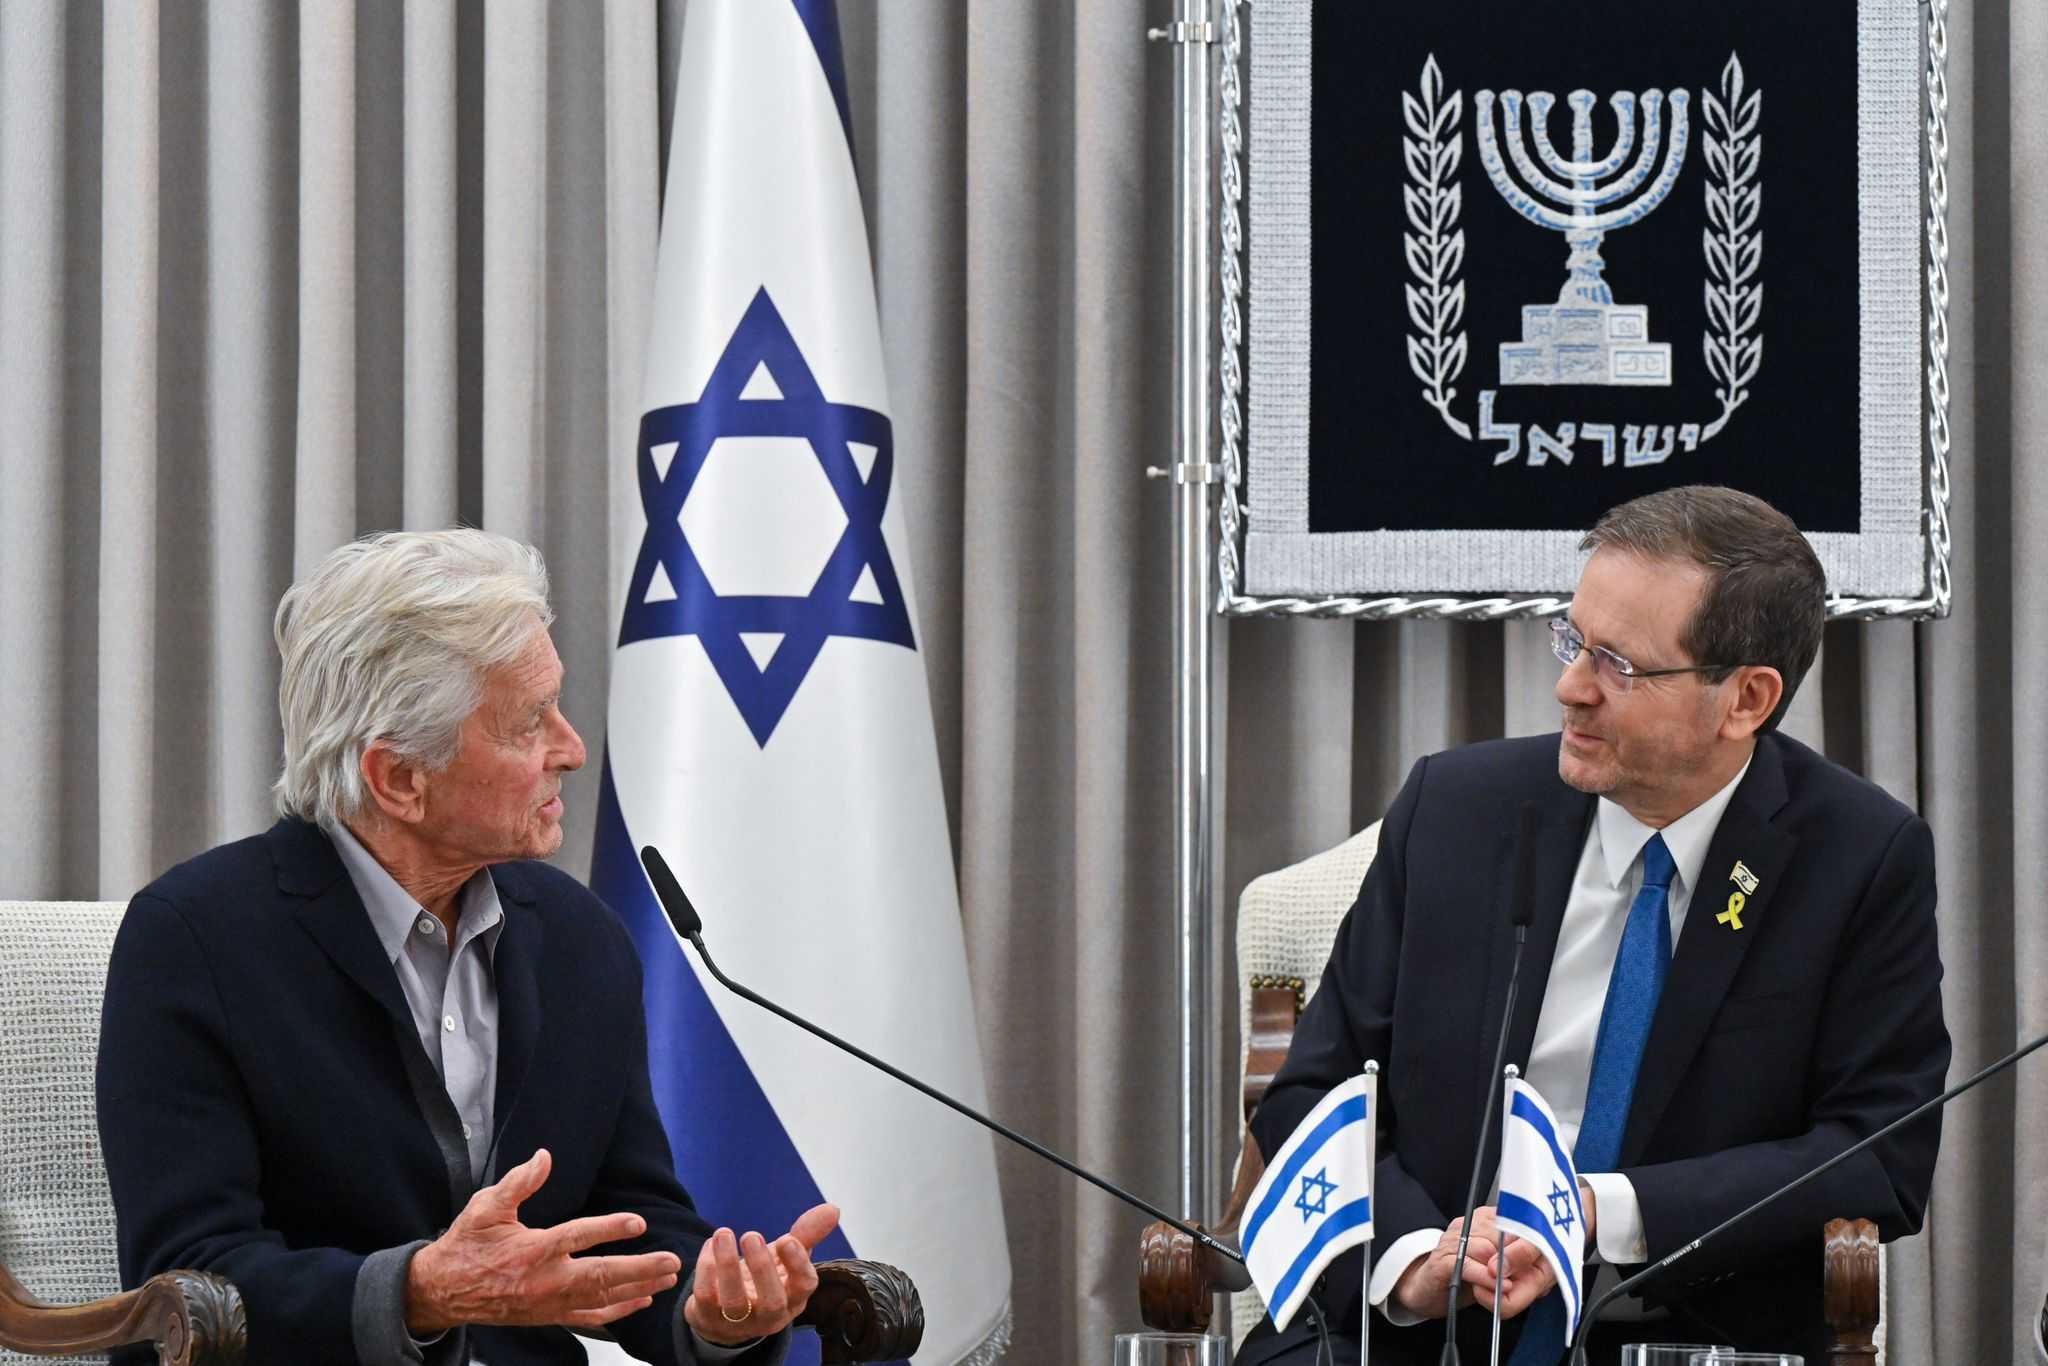 Visiting actor Michael Douglas tells Herzog: 'We're happy to be here in  support of Israel' | The Times of Israel